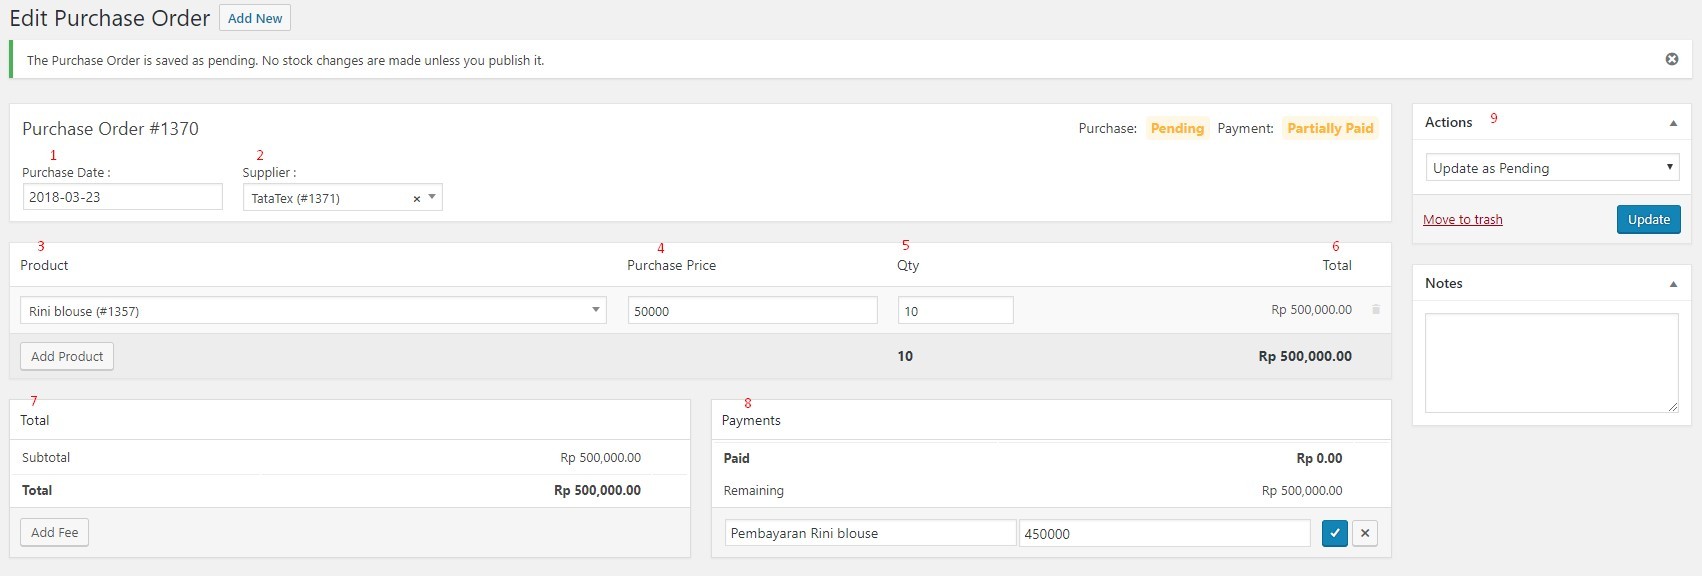 add purchase order 1